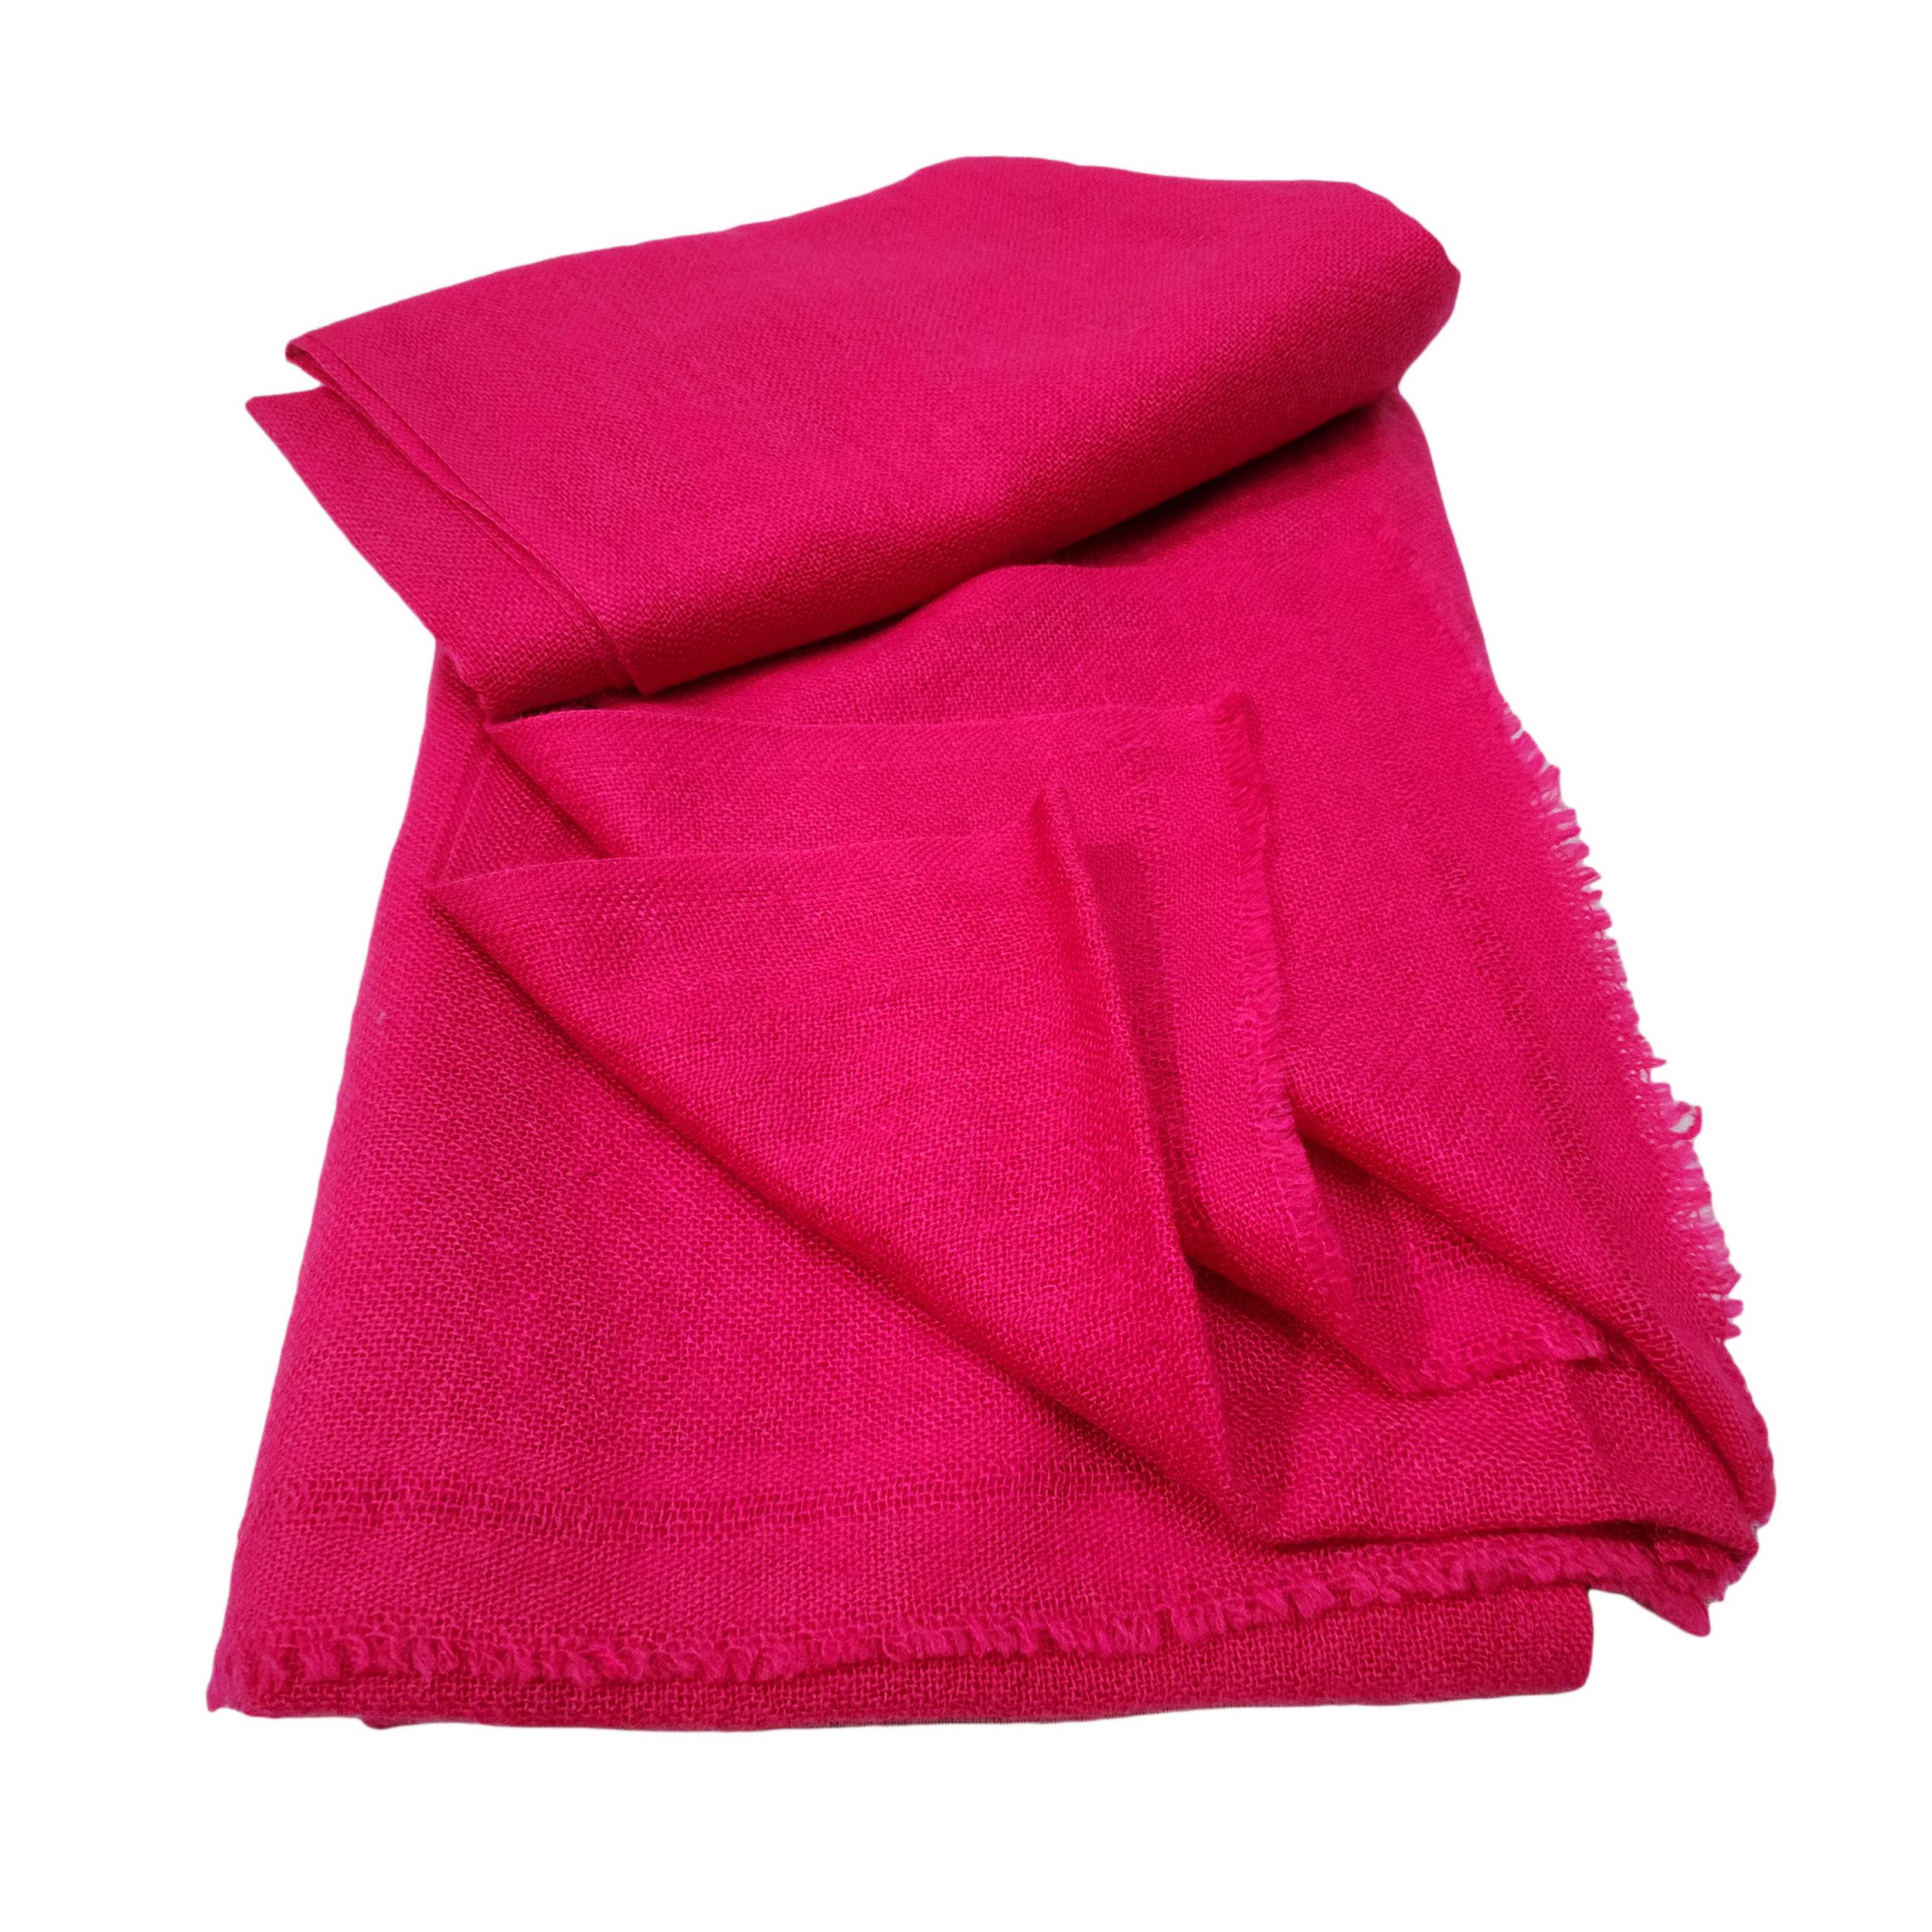 Pashmina Shawl, Nepali Handmade Shawl, In Four Ply Wool, Color red